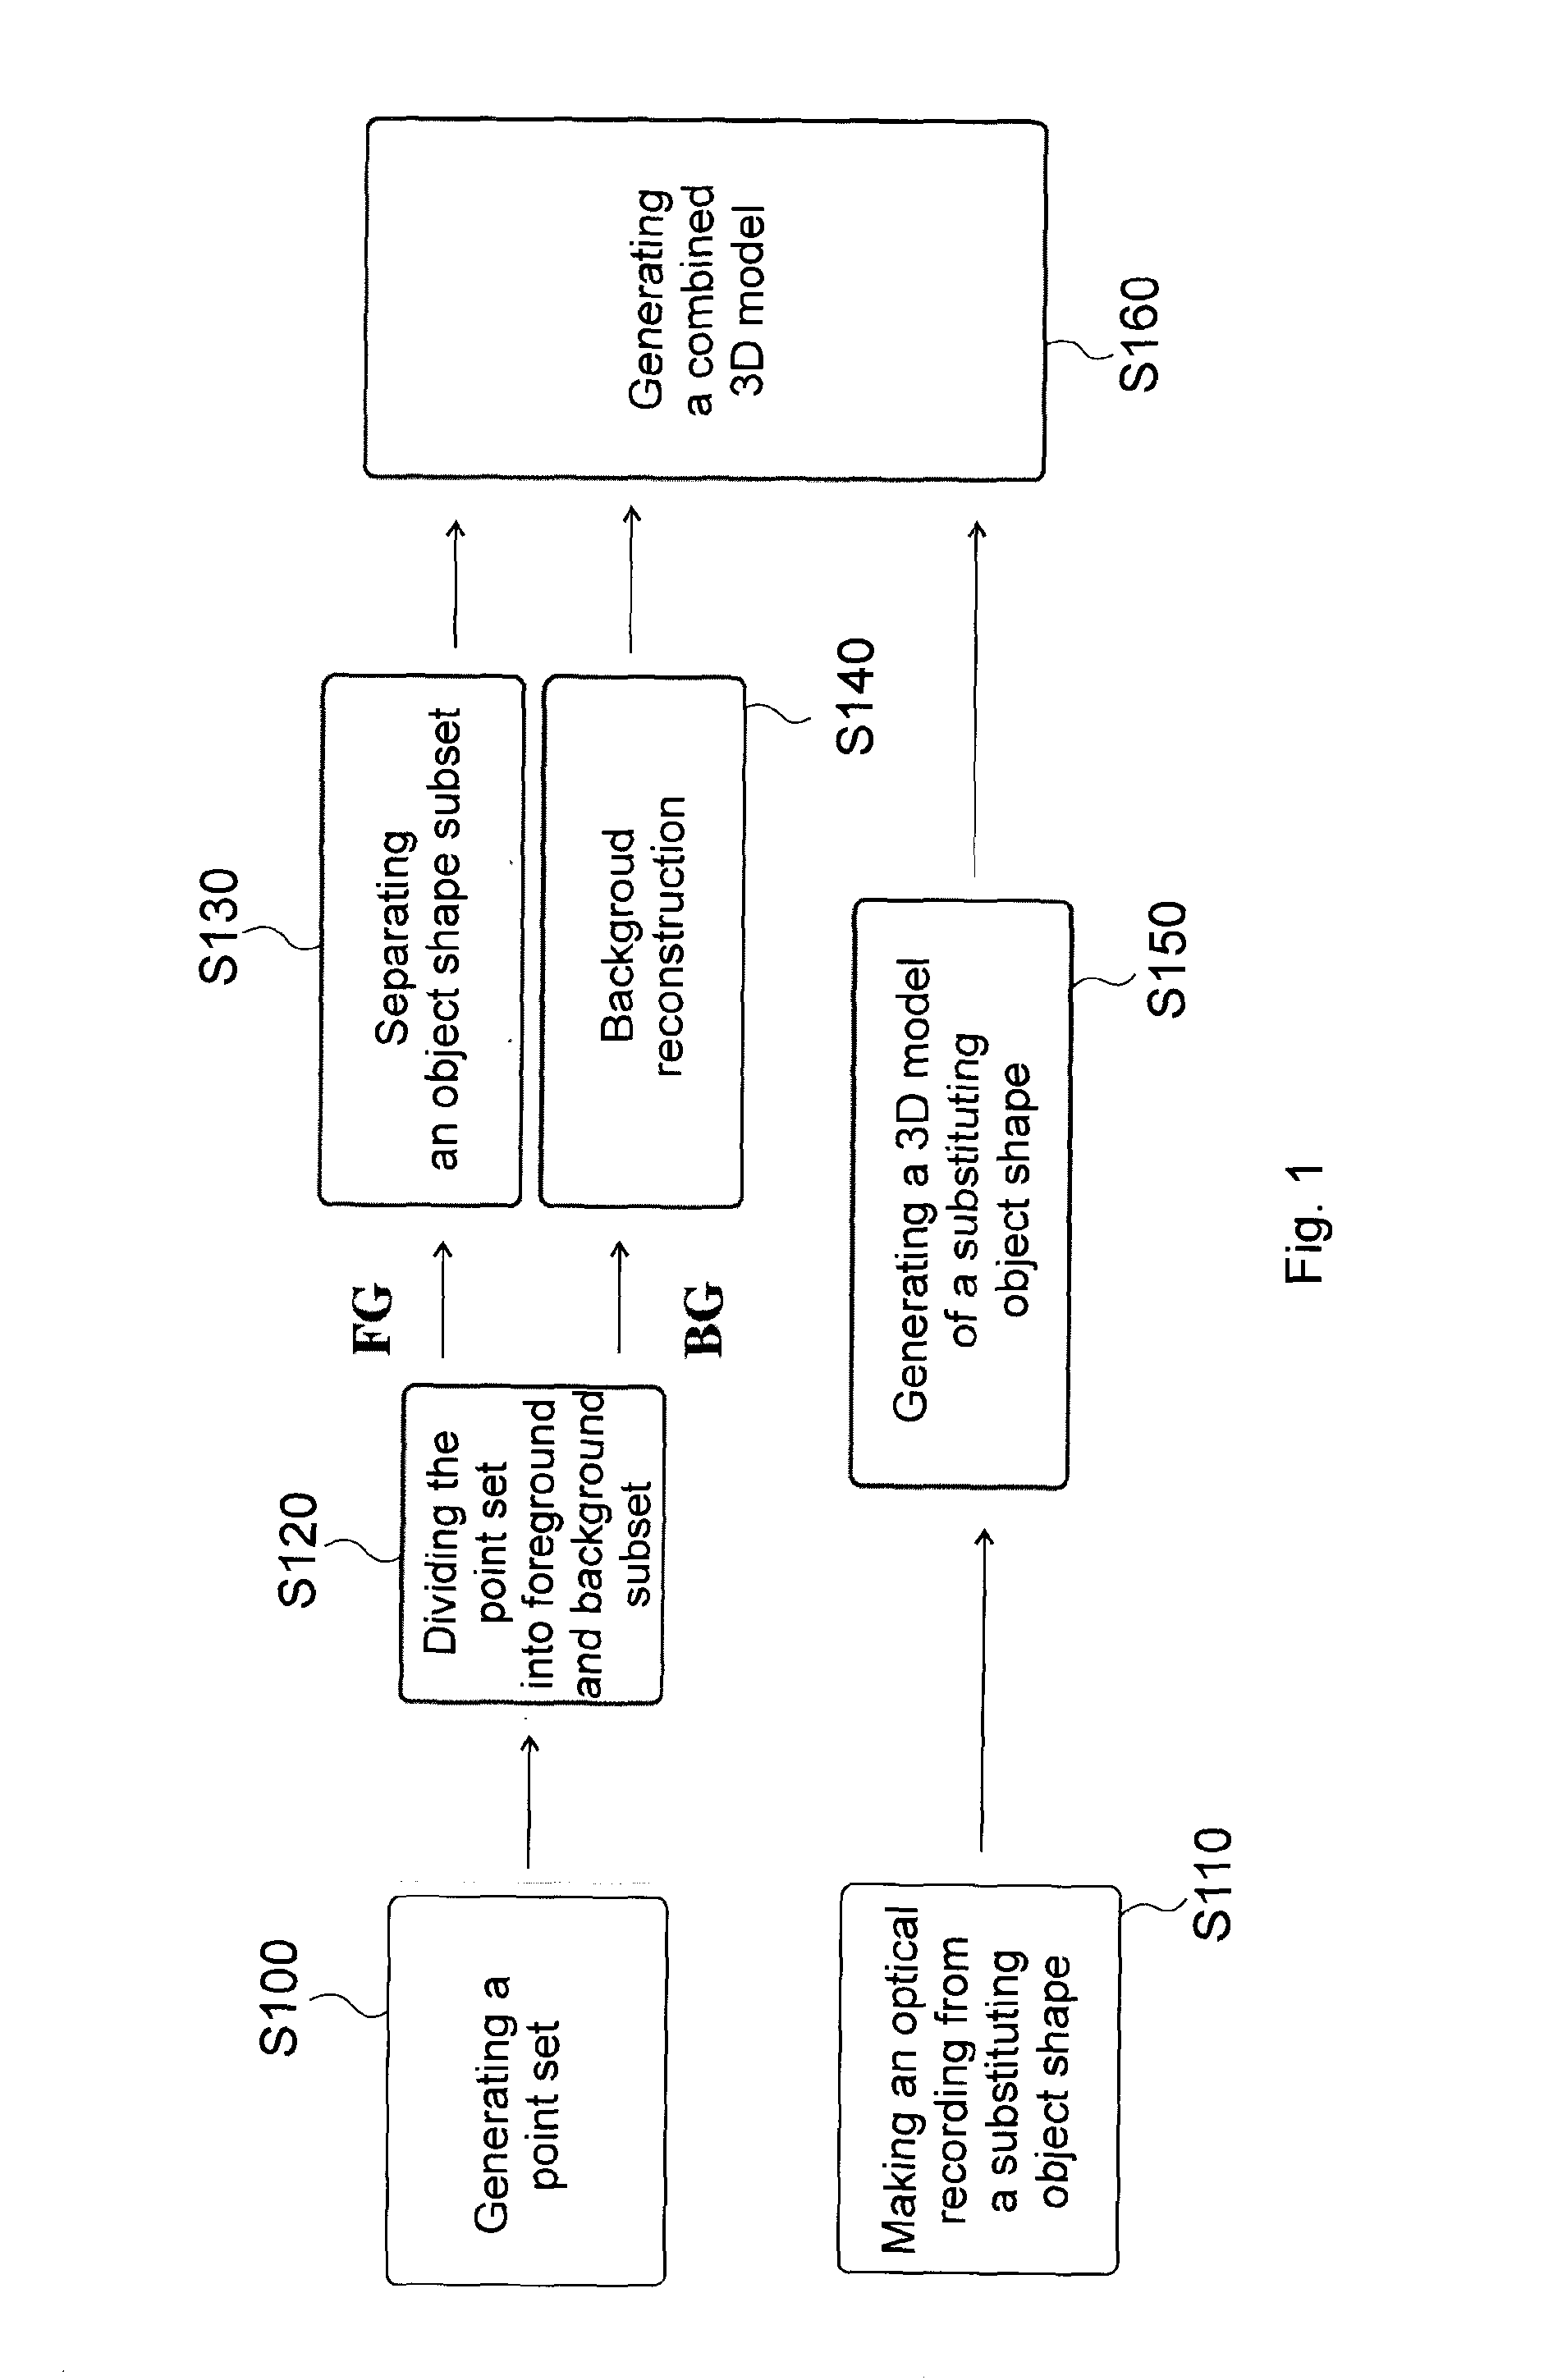 Method And System For Generating A Three-Dimensional Model